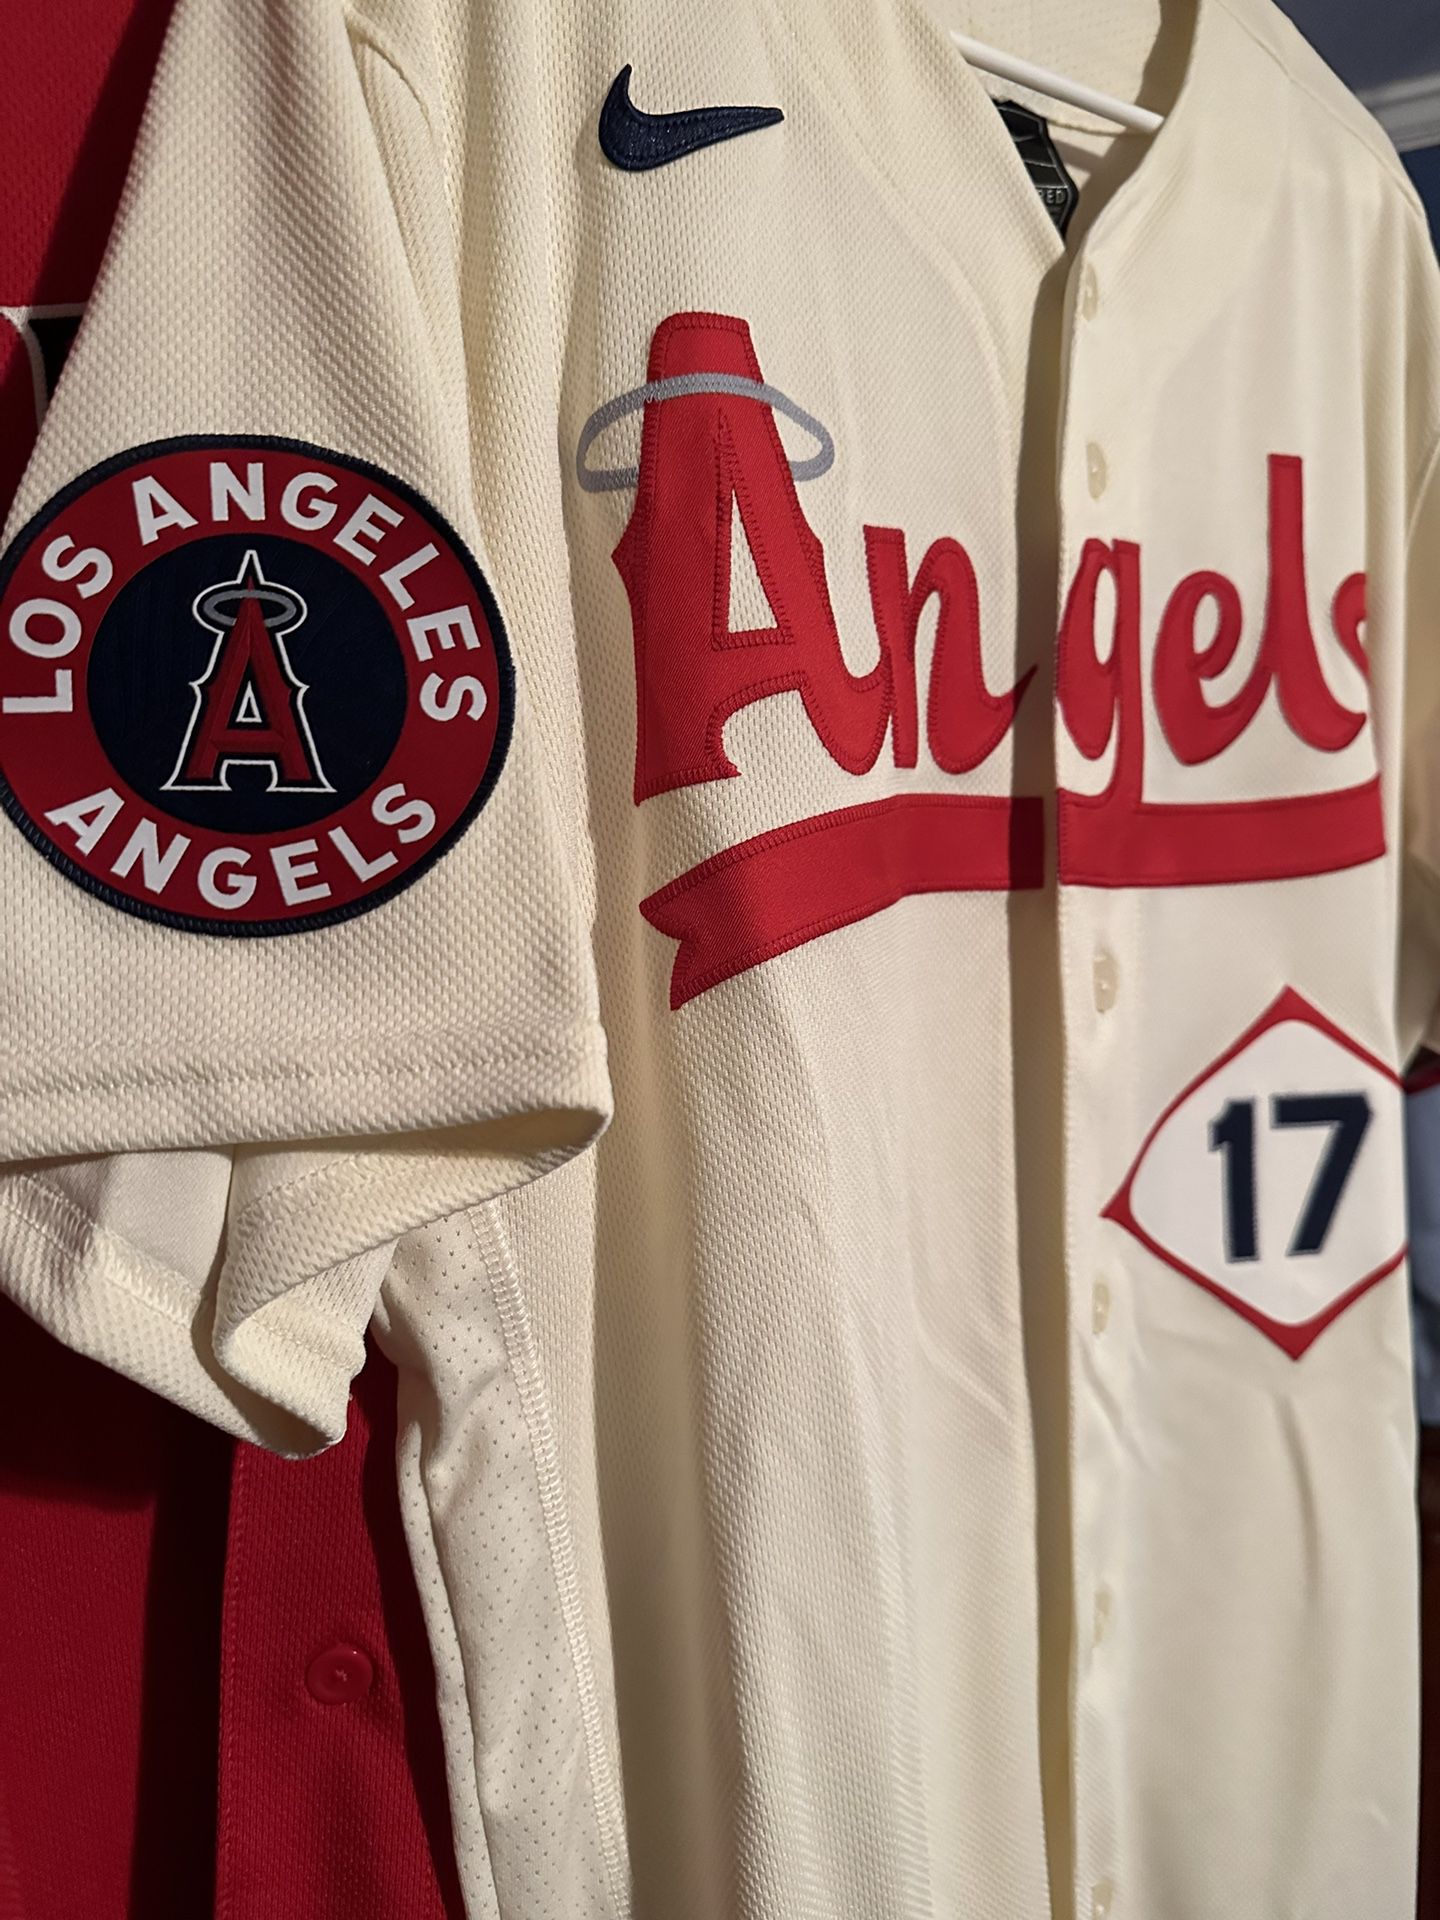 Washington Nationals City Connect Jersey for Sale in San Jose, CA - OfferUp